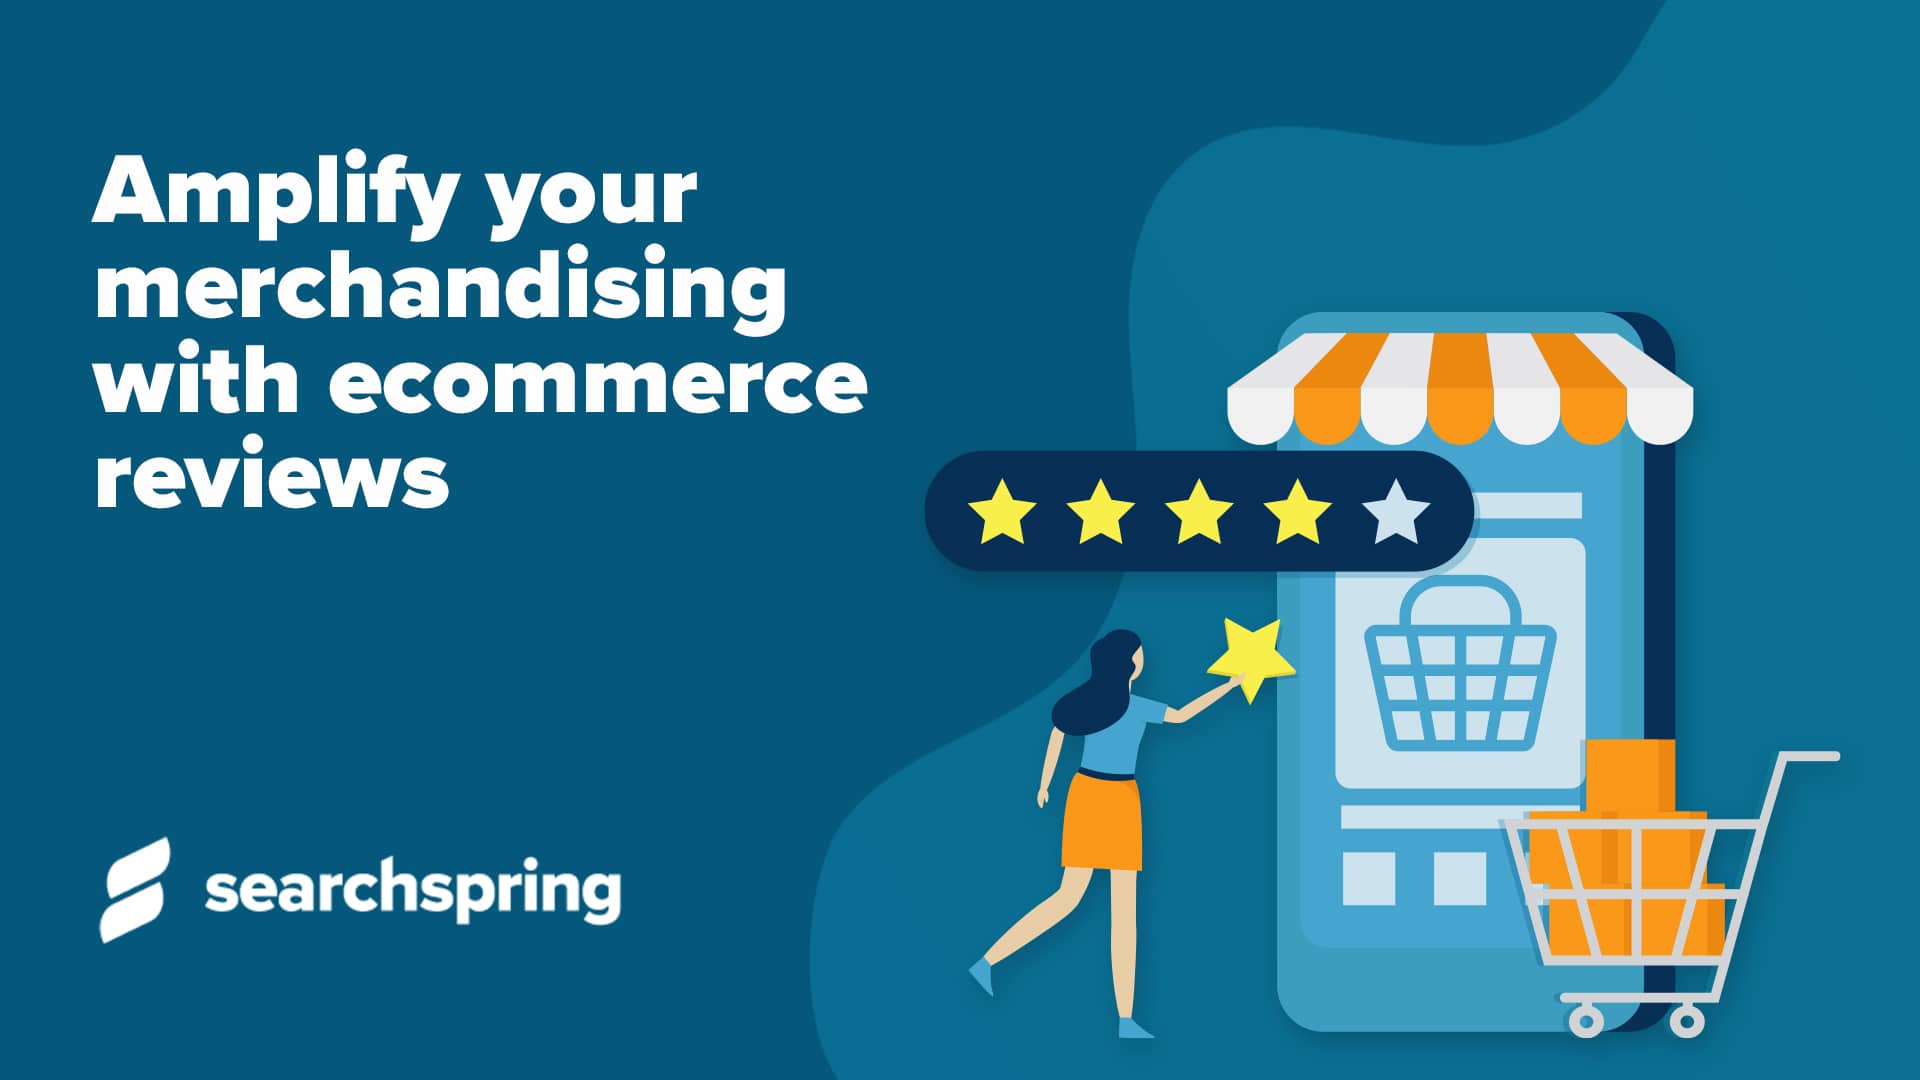 Amplify Your Merchandising with Ecommerce Reviews - Searchspring